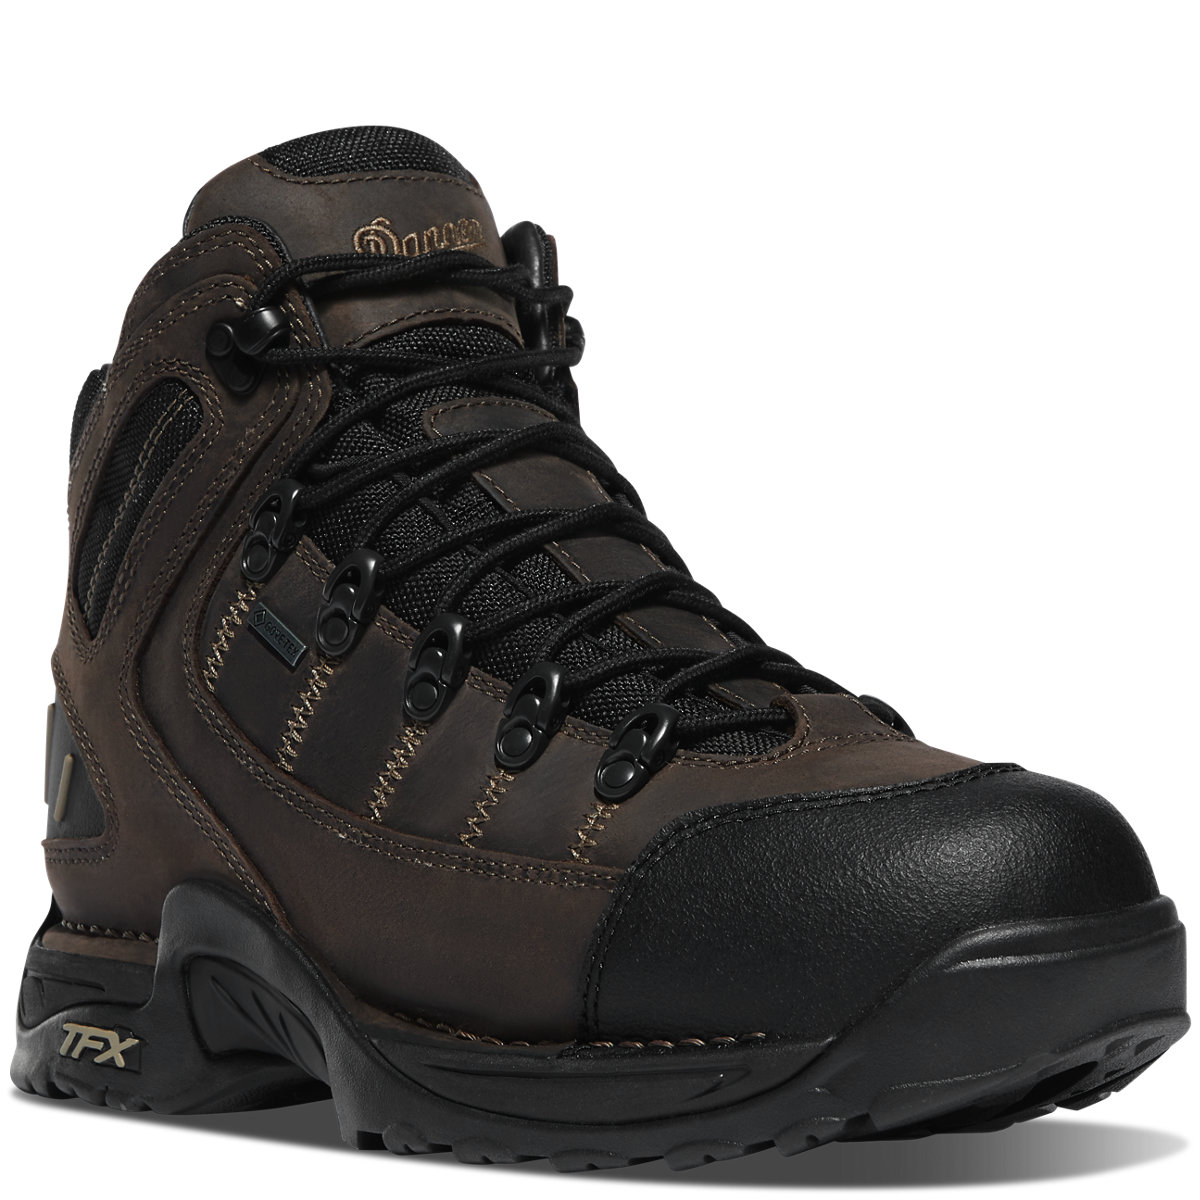 Danner 453 5.5" Loam Brown/Chocolate Chip